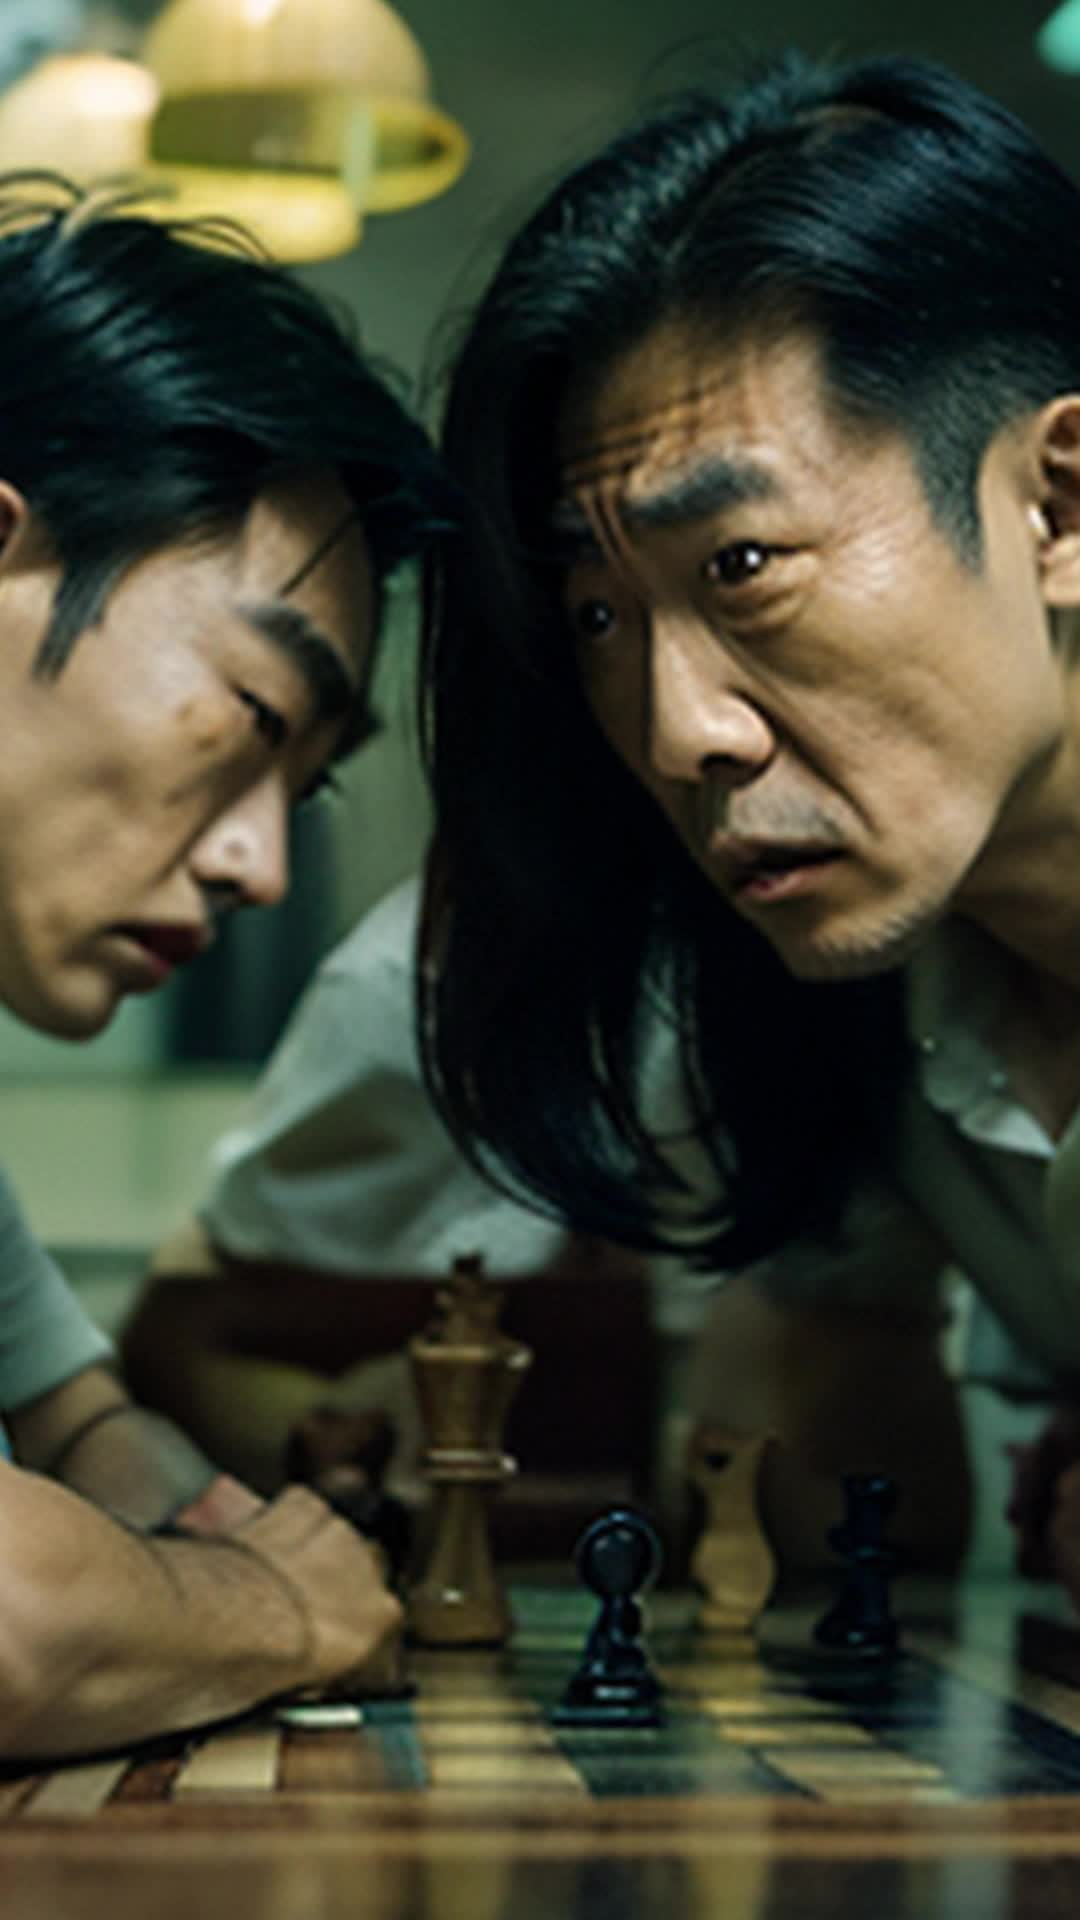 An angry Chinese man and an ignorant American play chess the wrong way